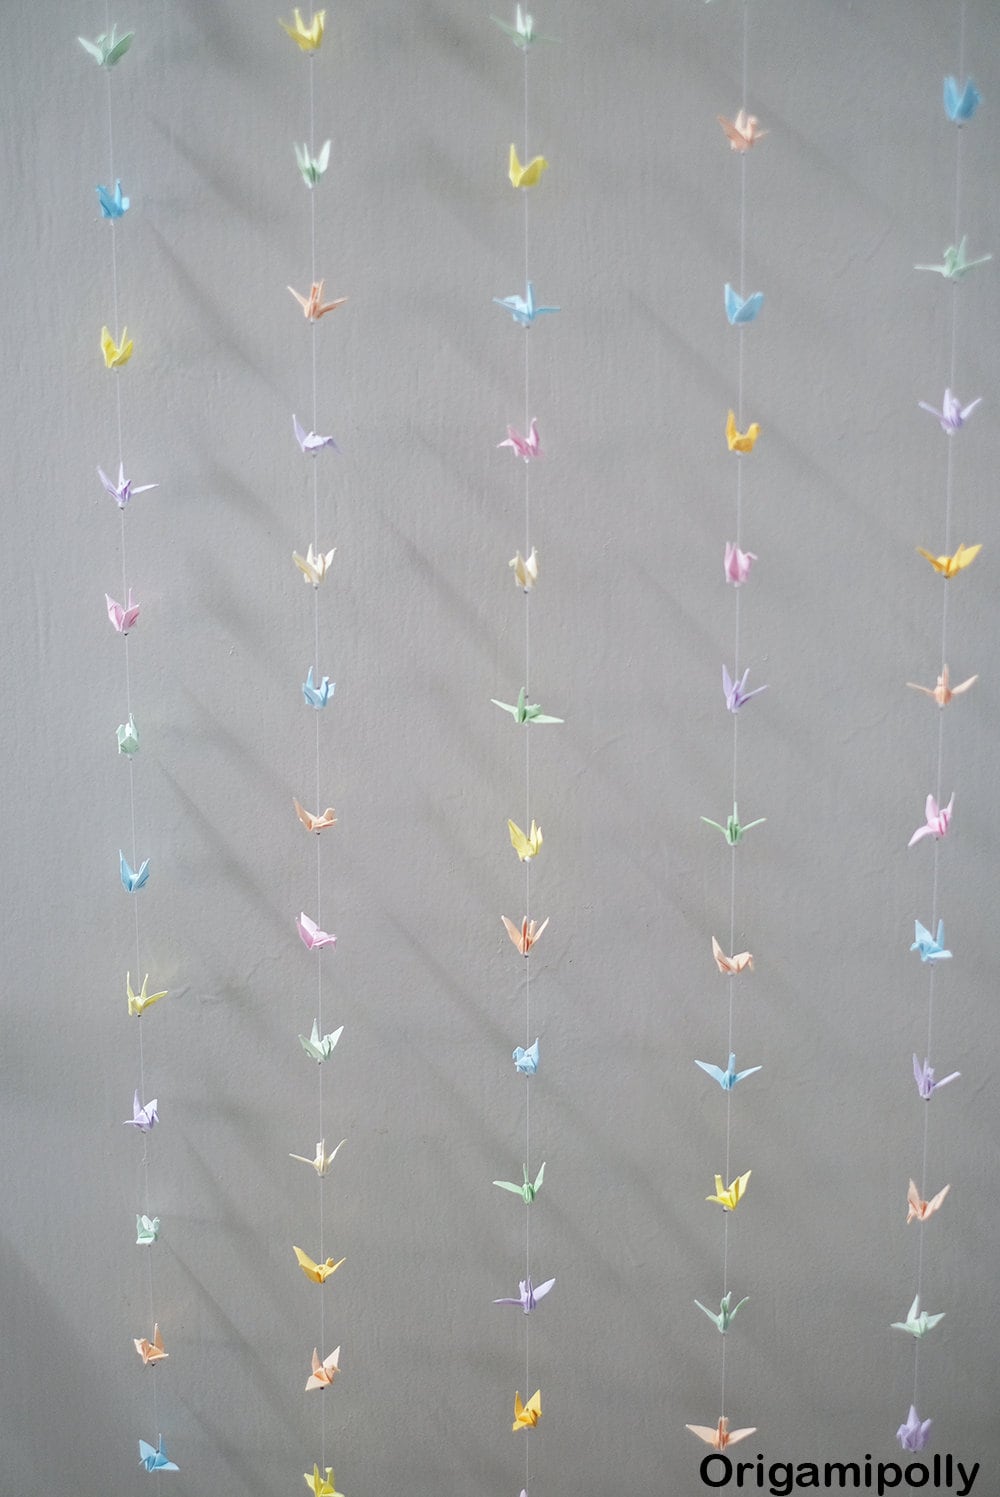 1 String 25 Crane Origami Crane Garland Mixed color Small 1.5 inch Origami paper crane On String for Wedding decoration Backdrop